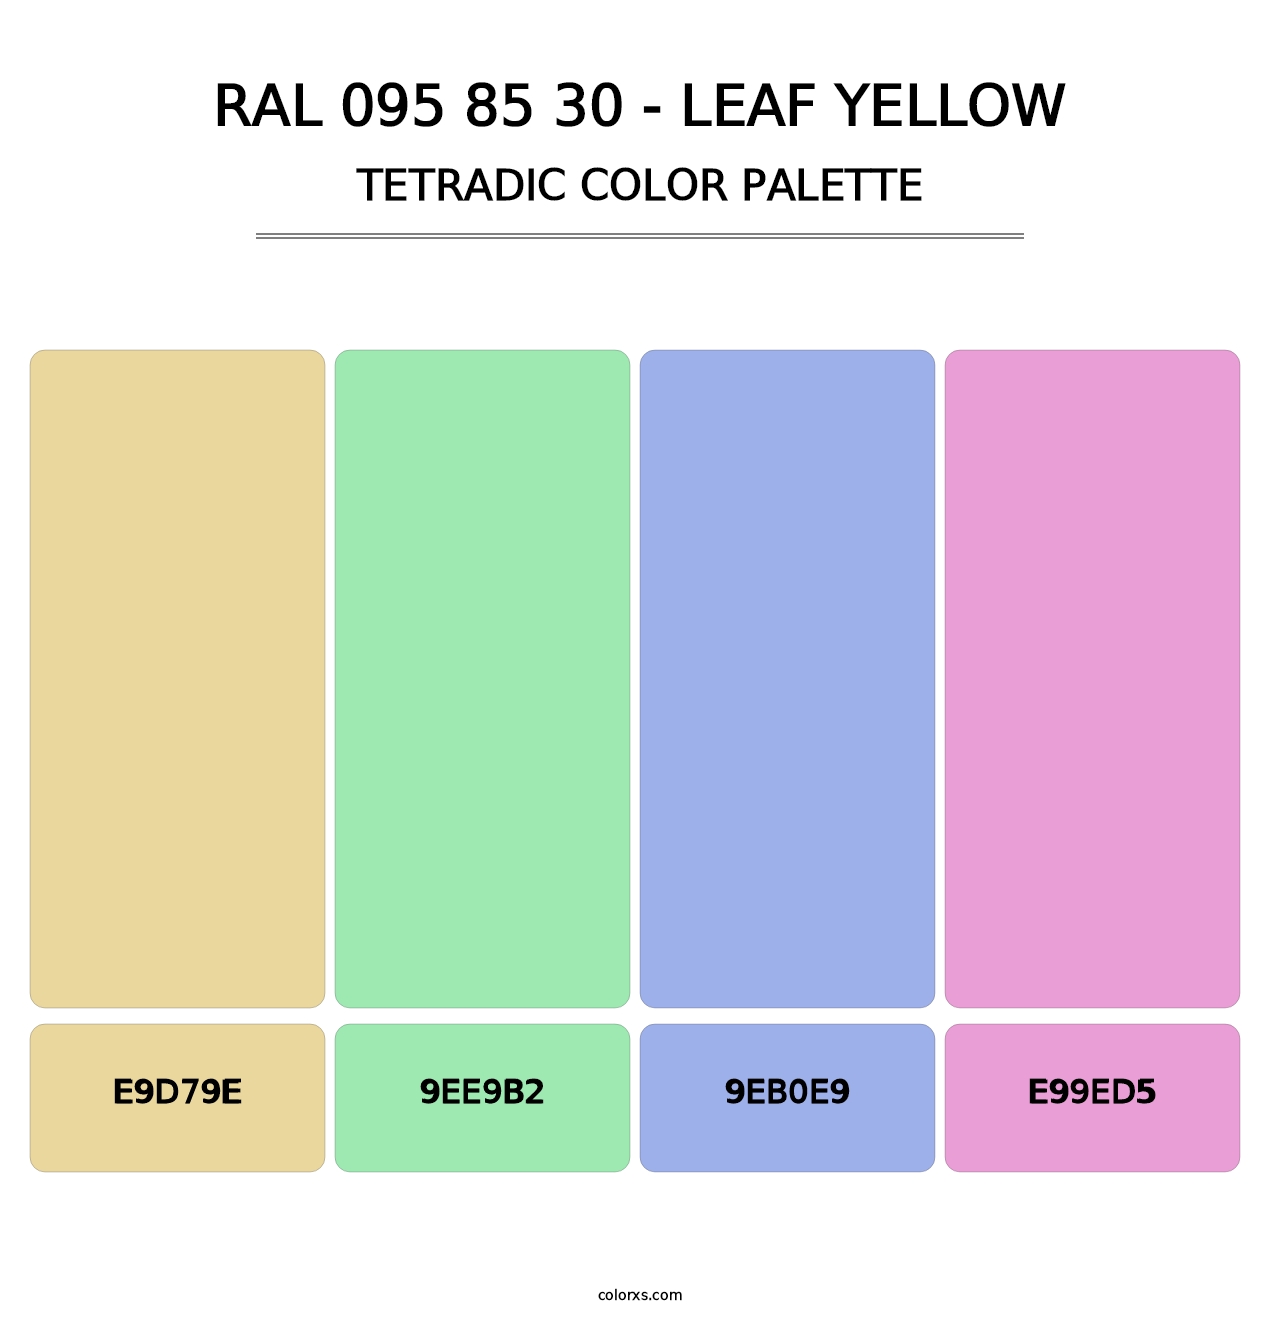 RAL 095 85 30 - Leaf Yellow - Tetradic Color Palette